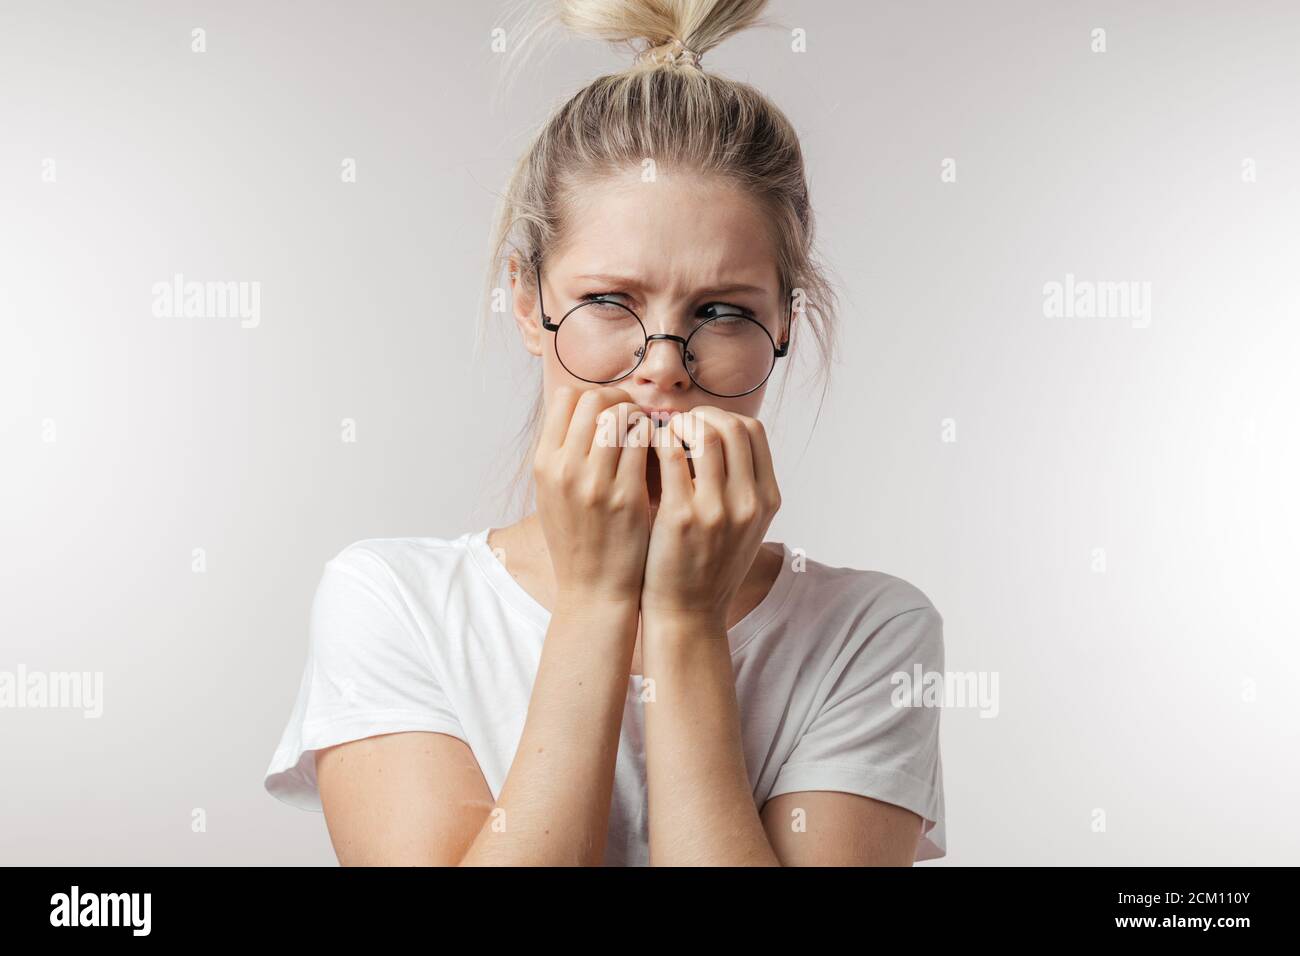 Portrait of offended unhappy beautiful woman holding hands near her mouth, ready to cry, displeased with everything, feels frustrated and upset. Negat Stock Photo